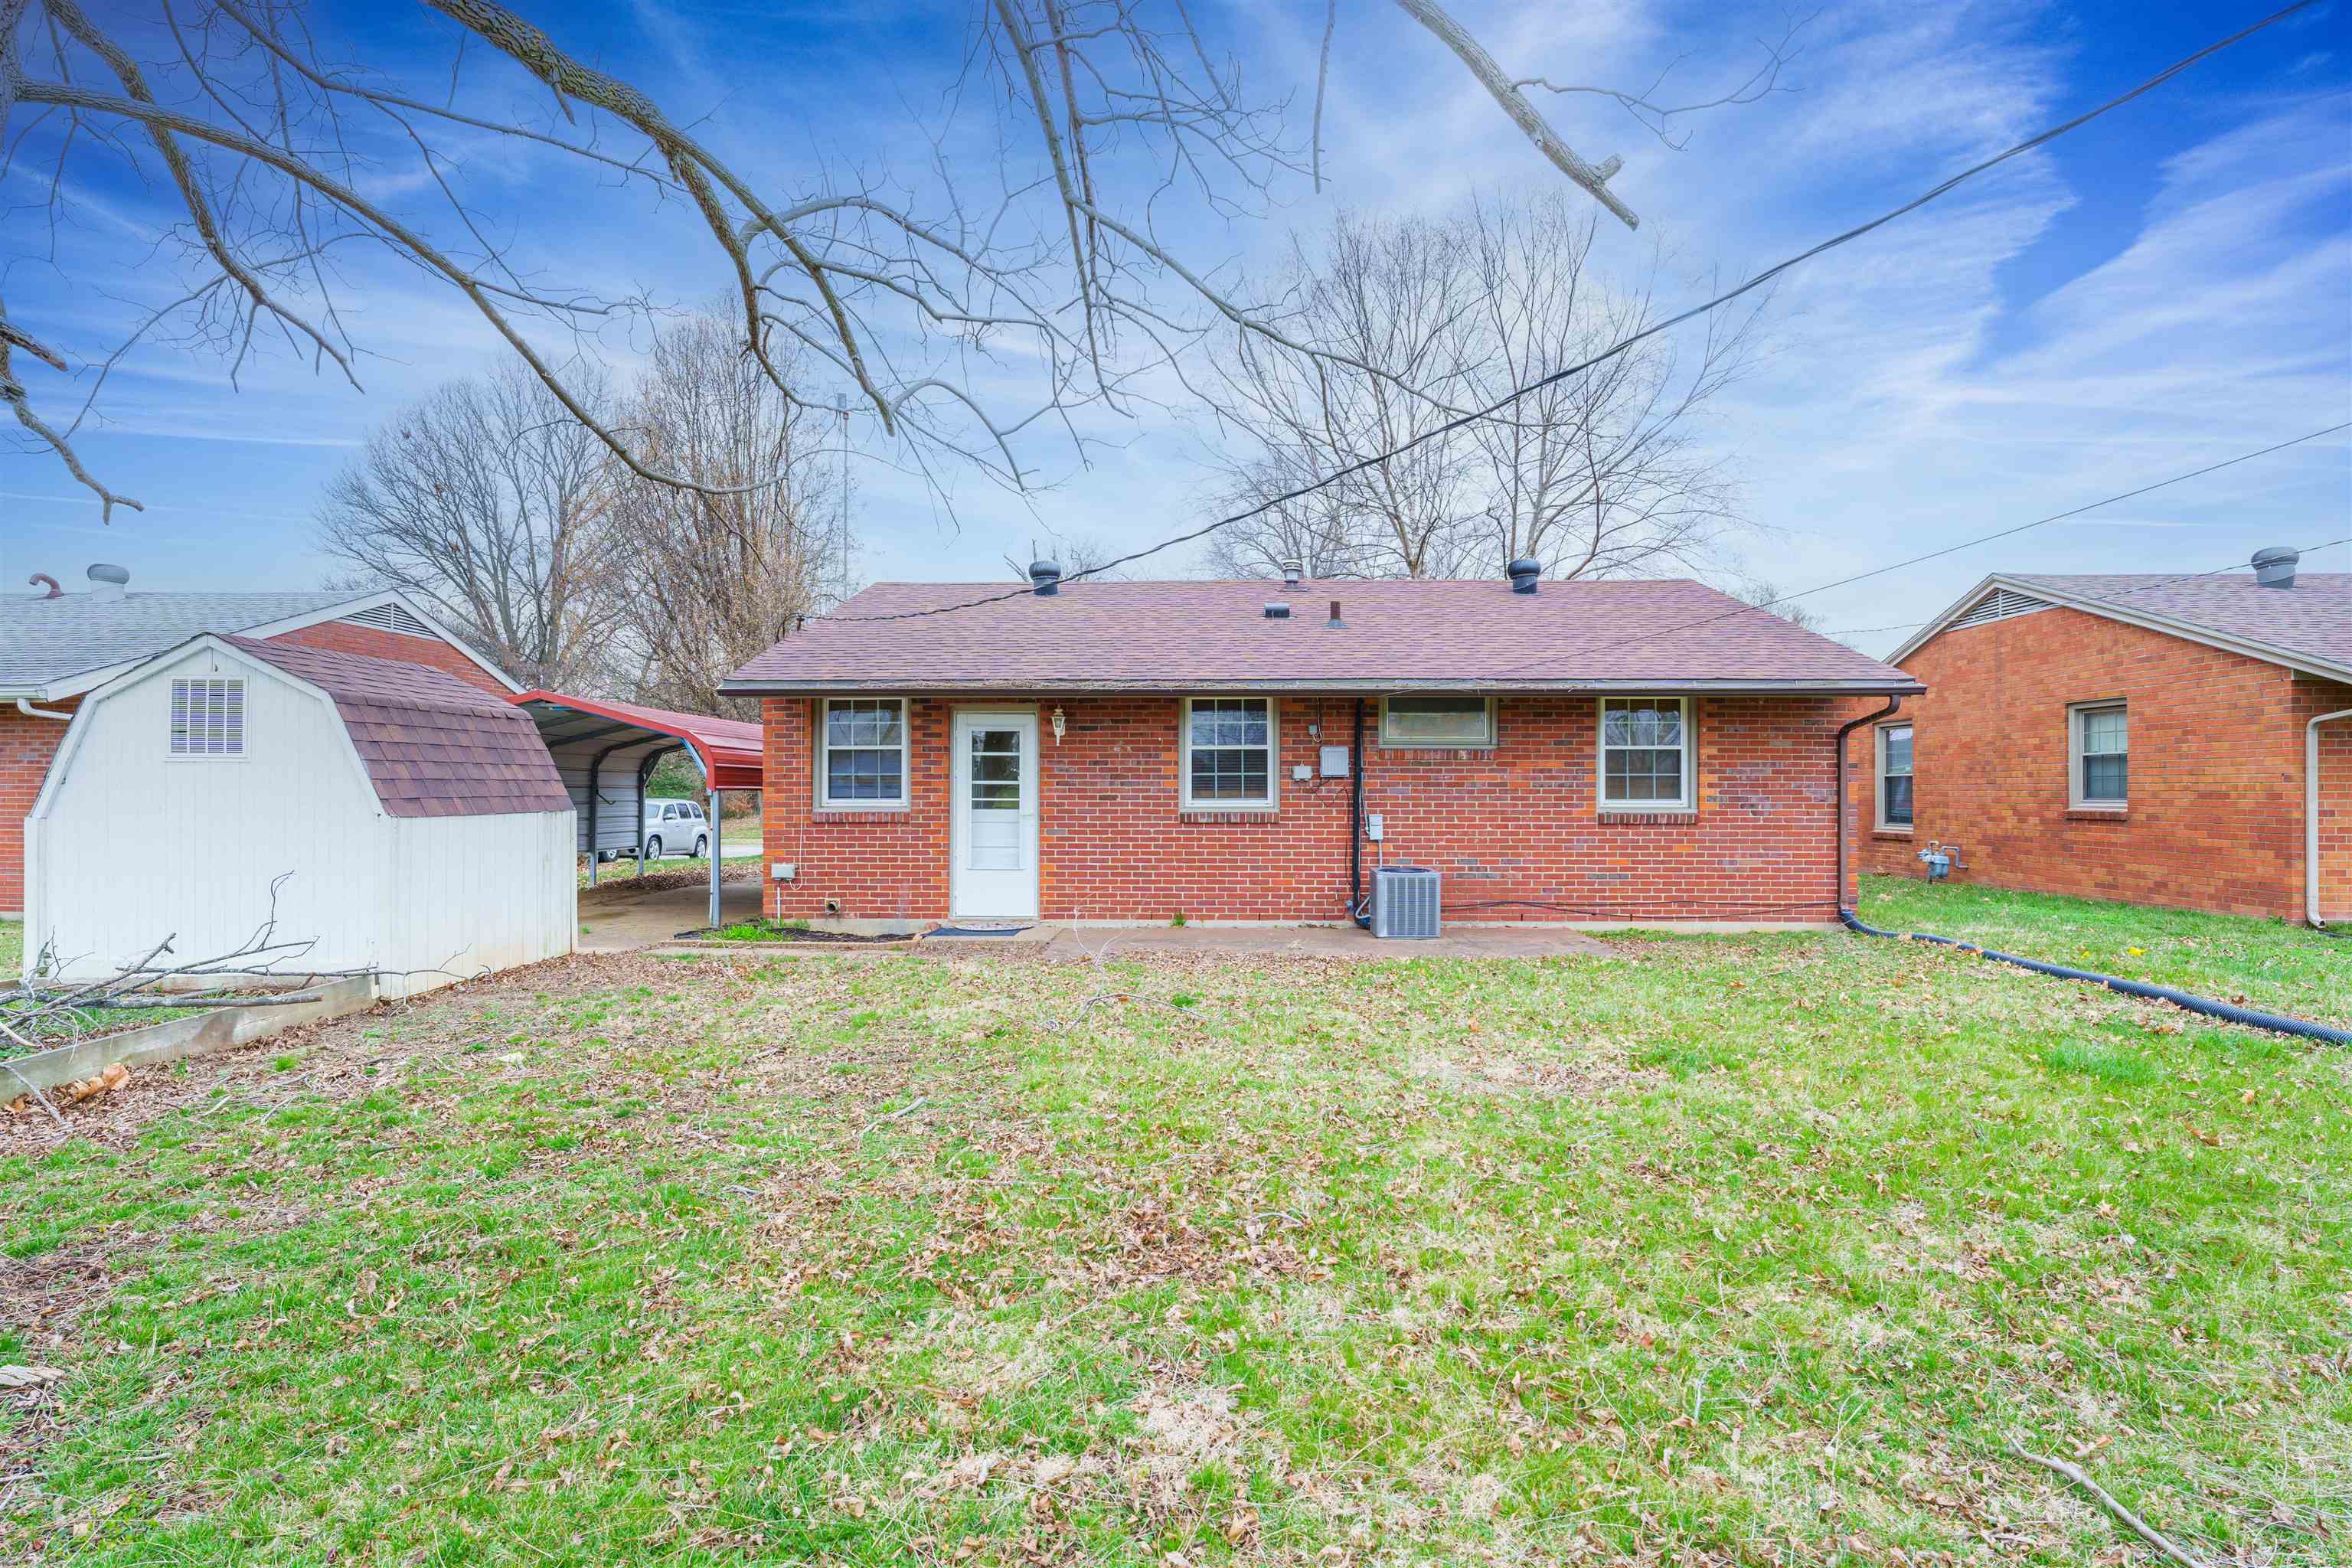 2060 Wyandotte Ave., Owensboro, Kentucky 42301, 3 Bedrooms Bedrooms, ,1 BathroomBathrooms,Single Family Residence,For Sale,Wyandotte Ave.,89133